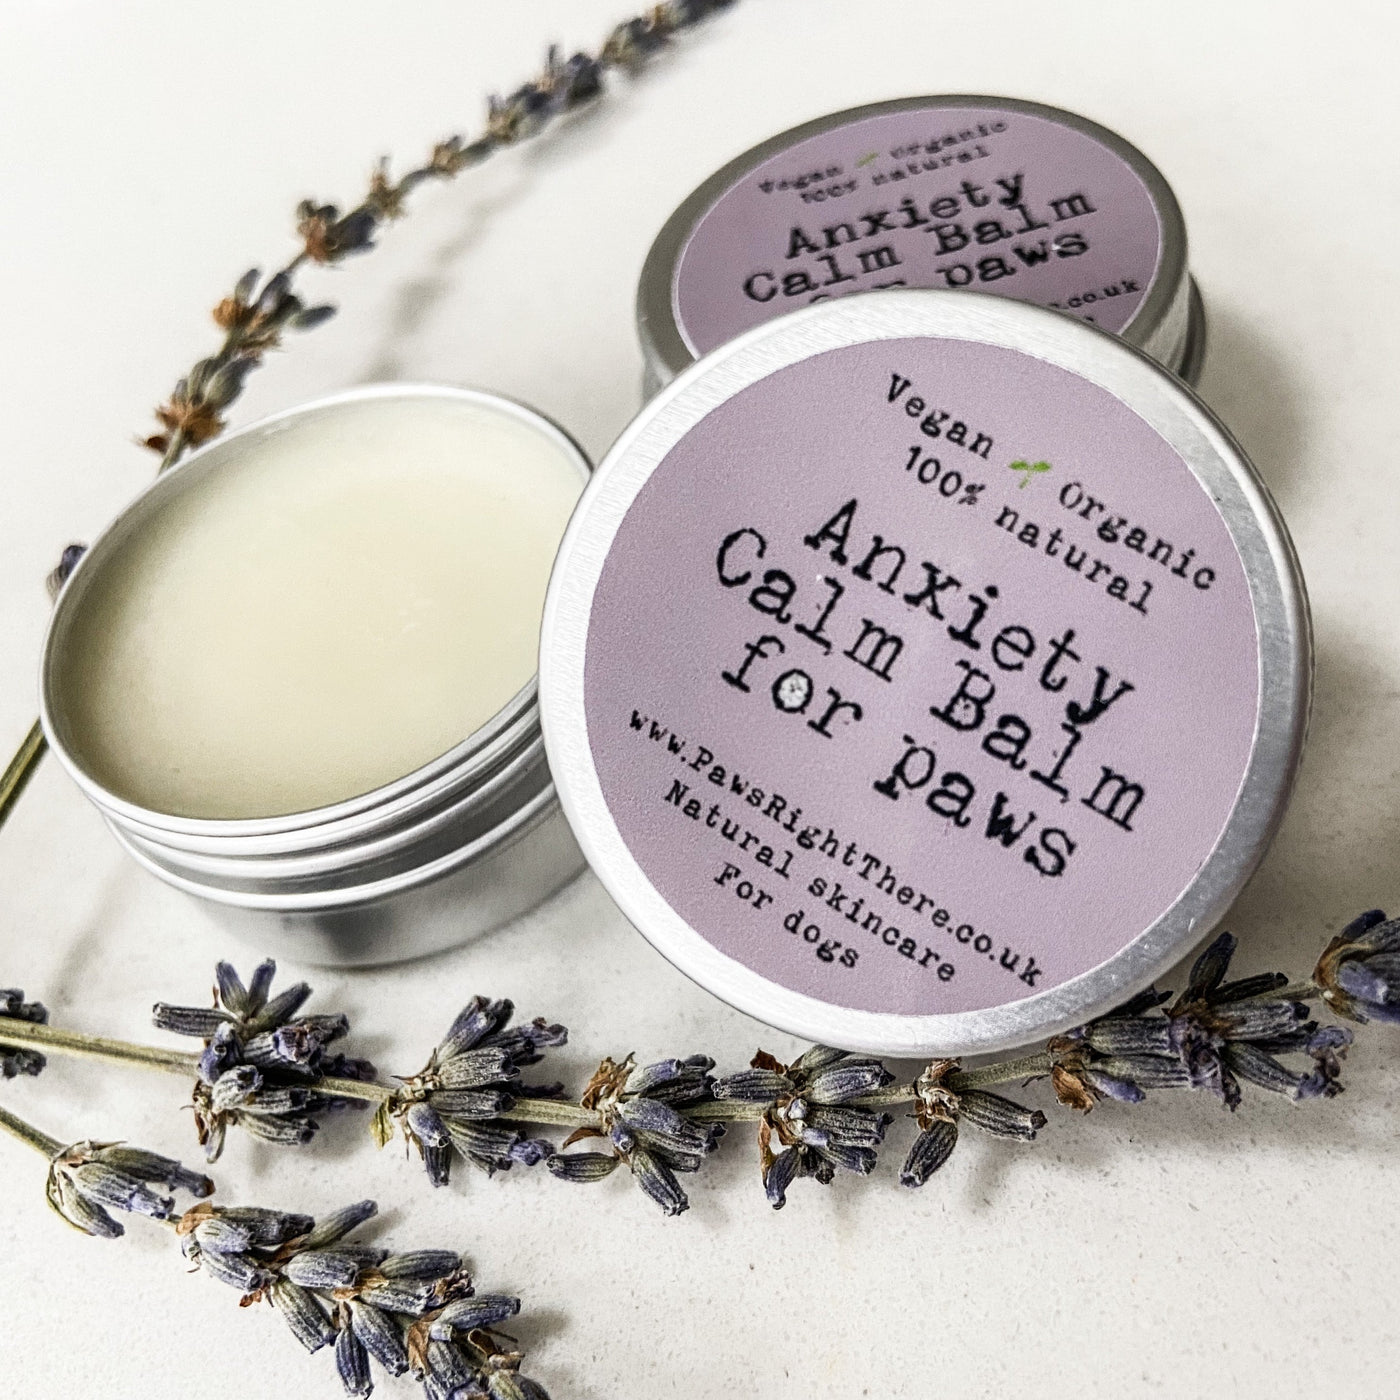 Anxiety Dog Soothing Calm Balm organic paw balm to help soothe irritation and reduce anxiety 